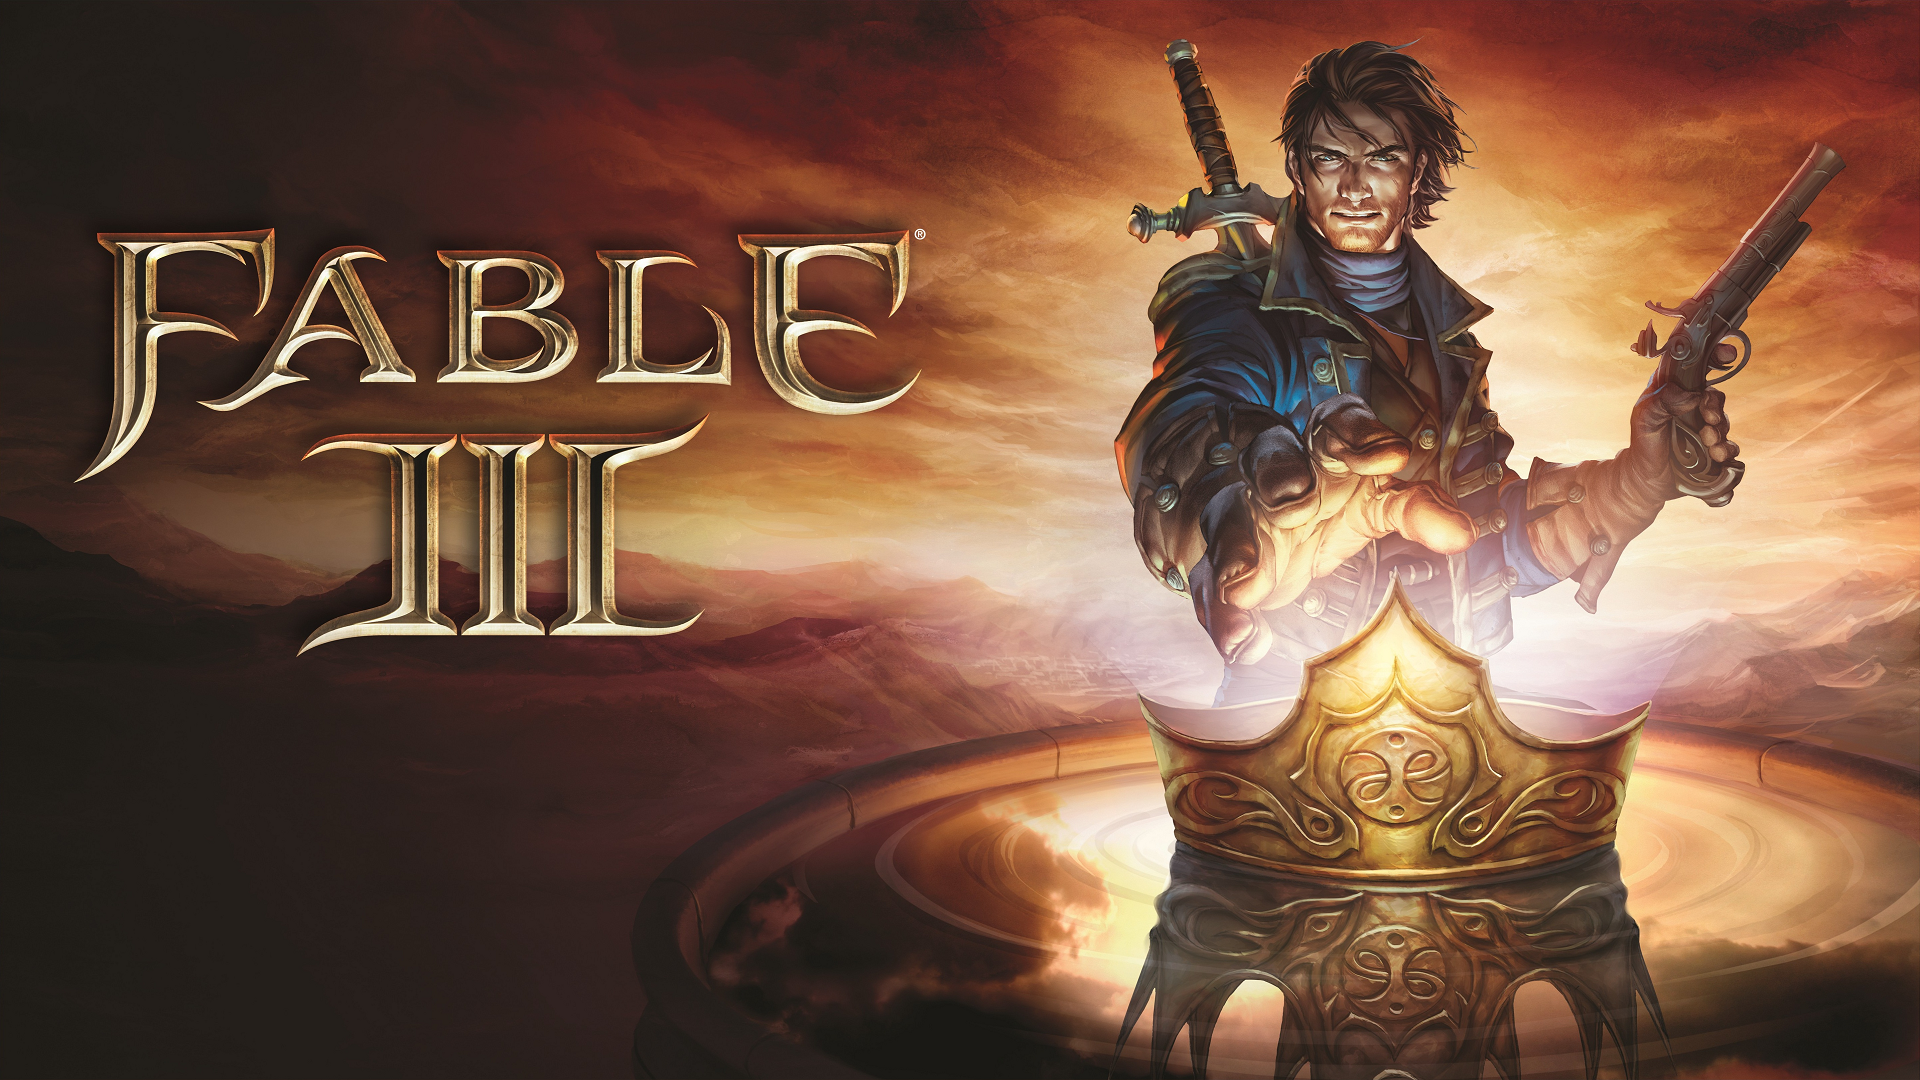 Fable Video Games Fable Iii Video Game Art 1920x1080